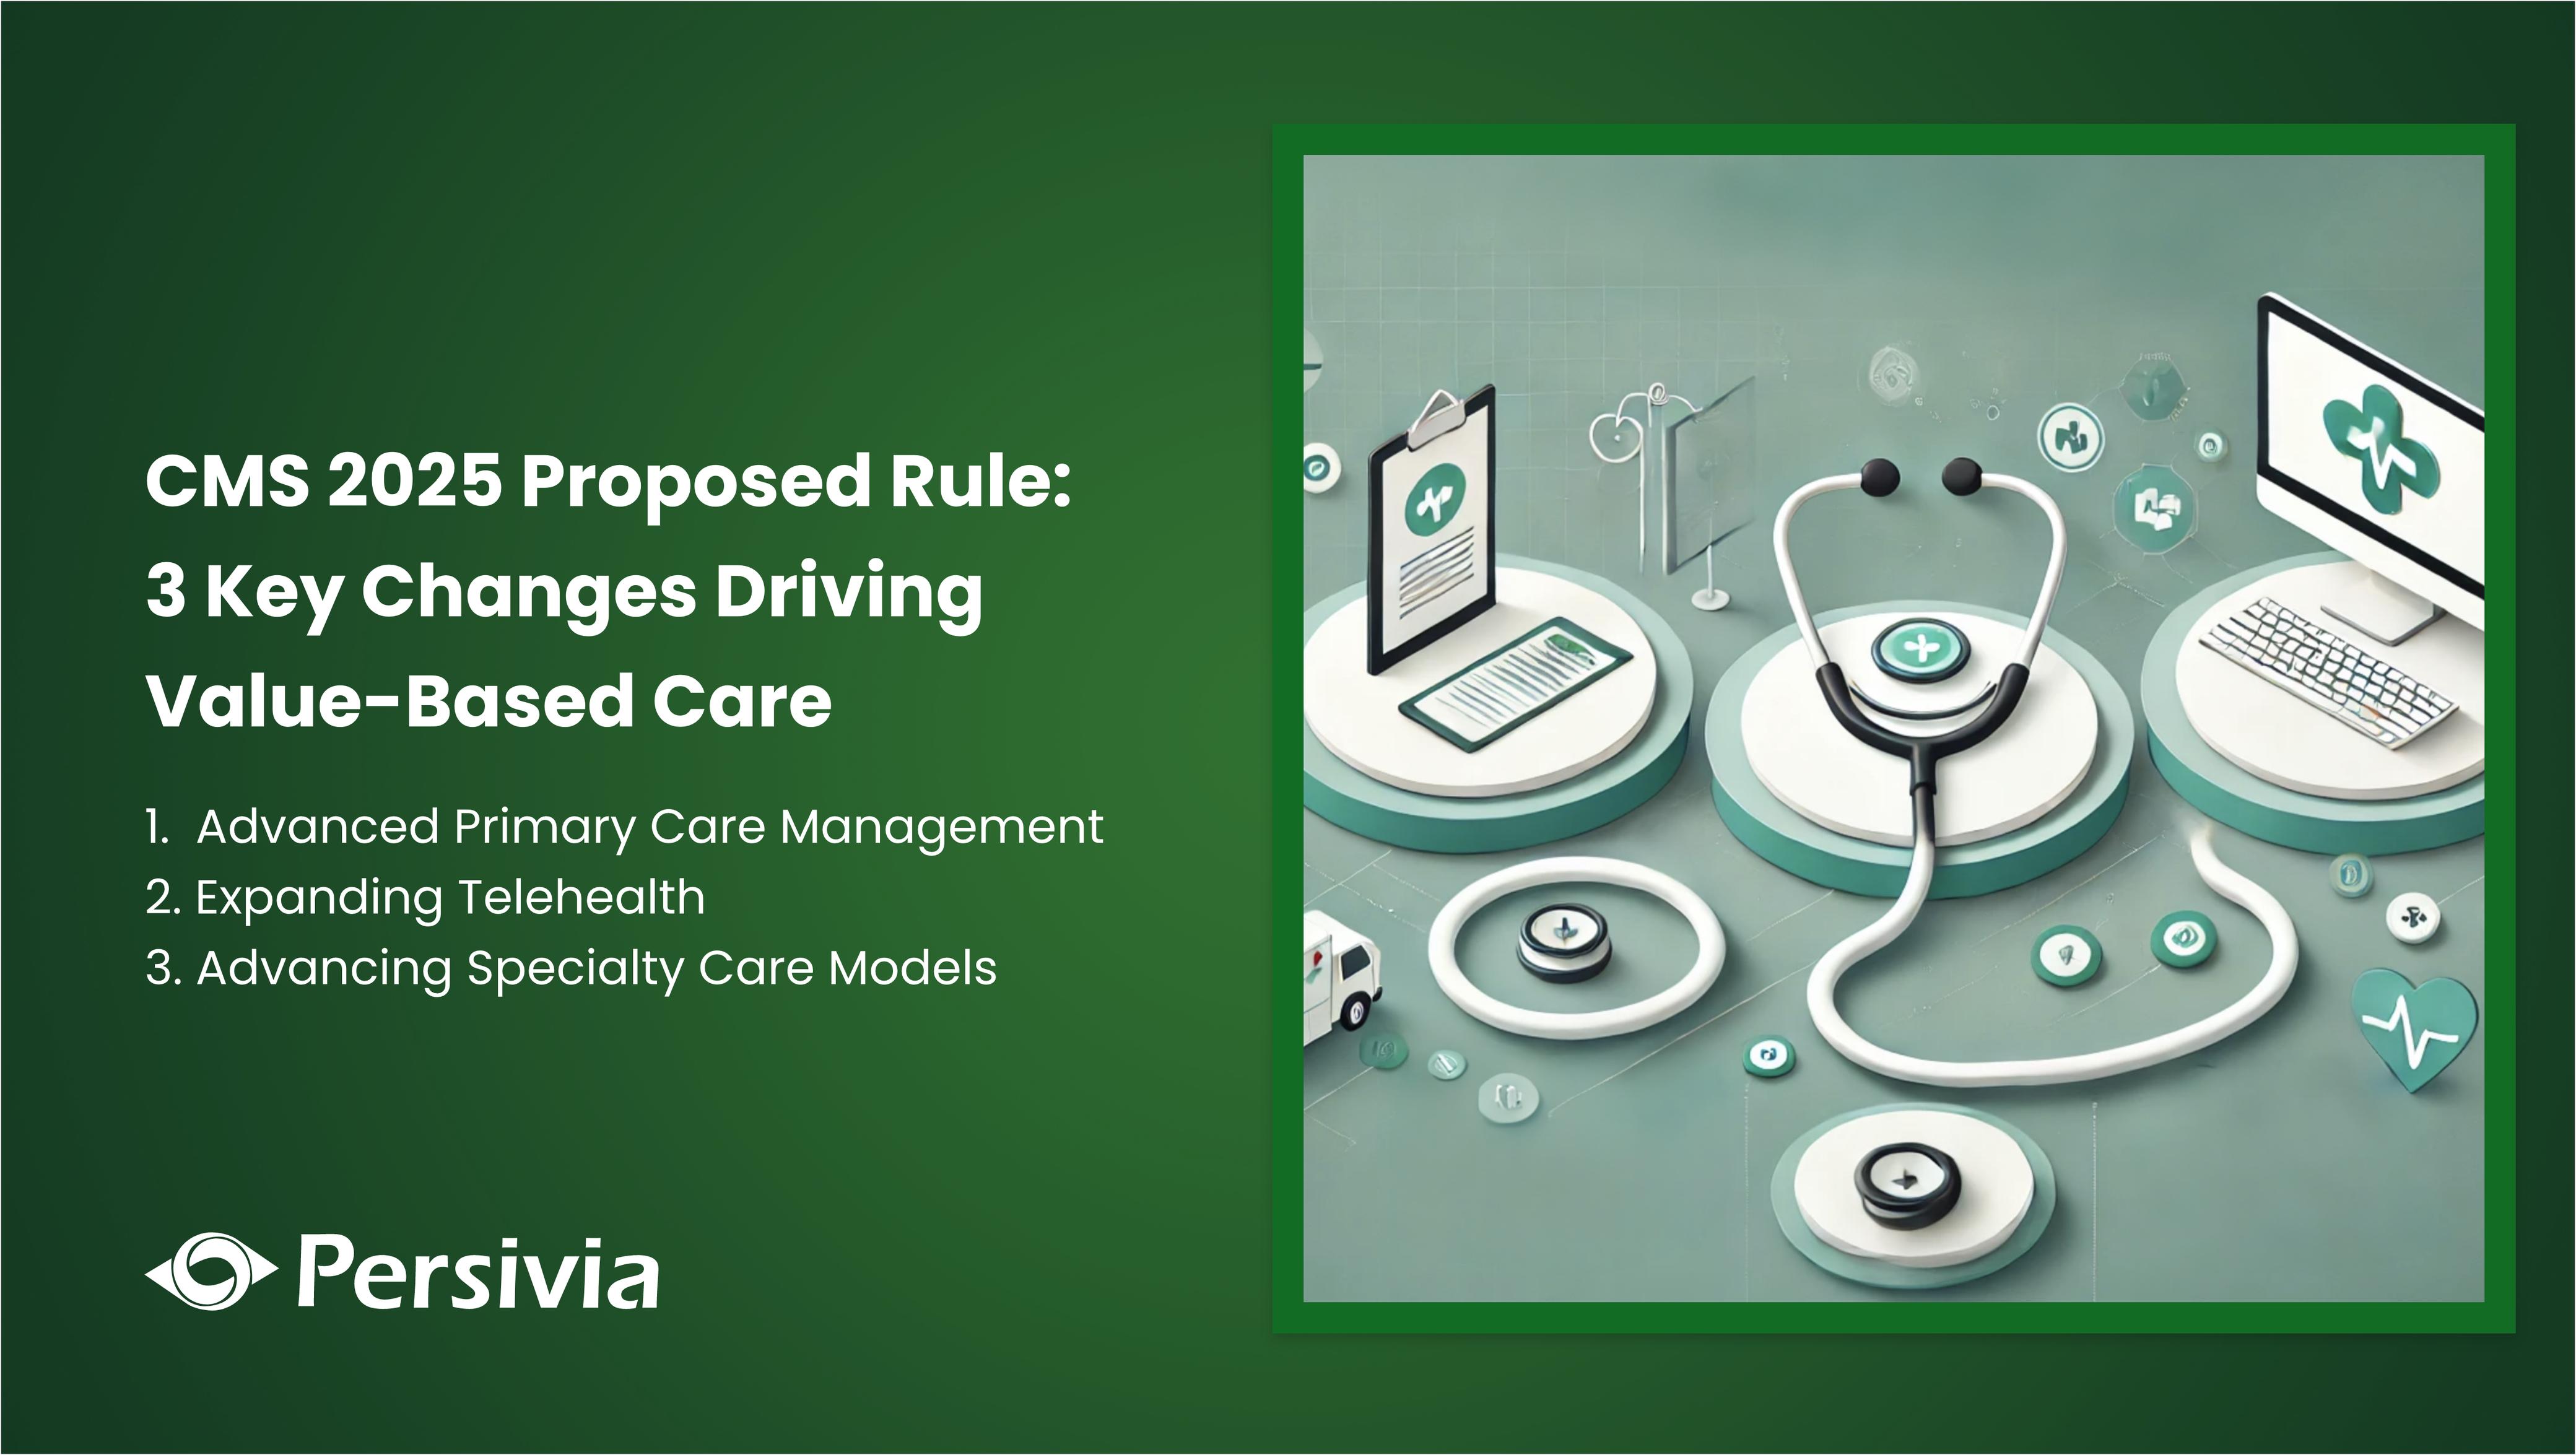 CMS 2025 Proposed Rule: 3 Key Changes Driving Value-Based Care